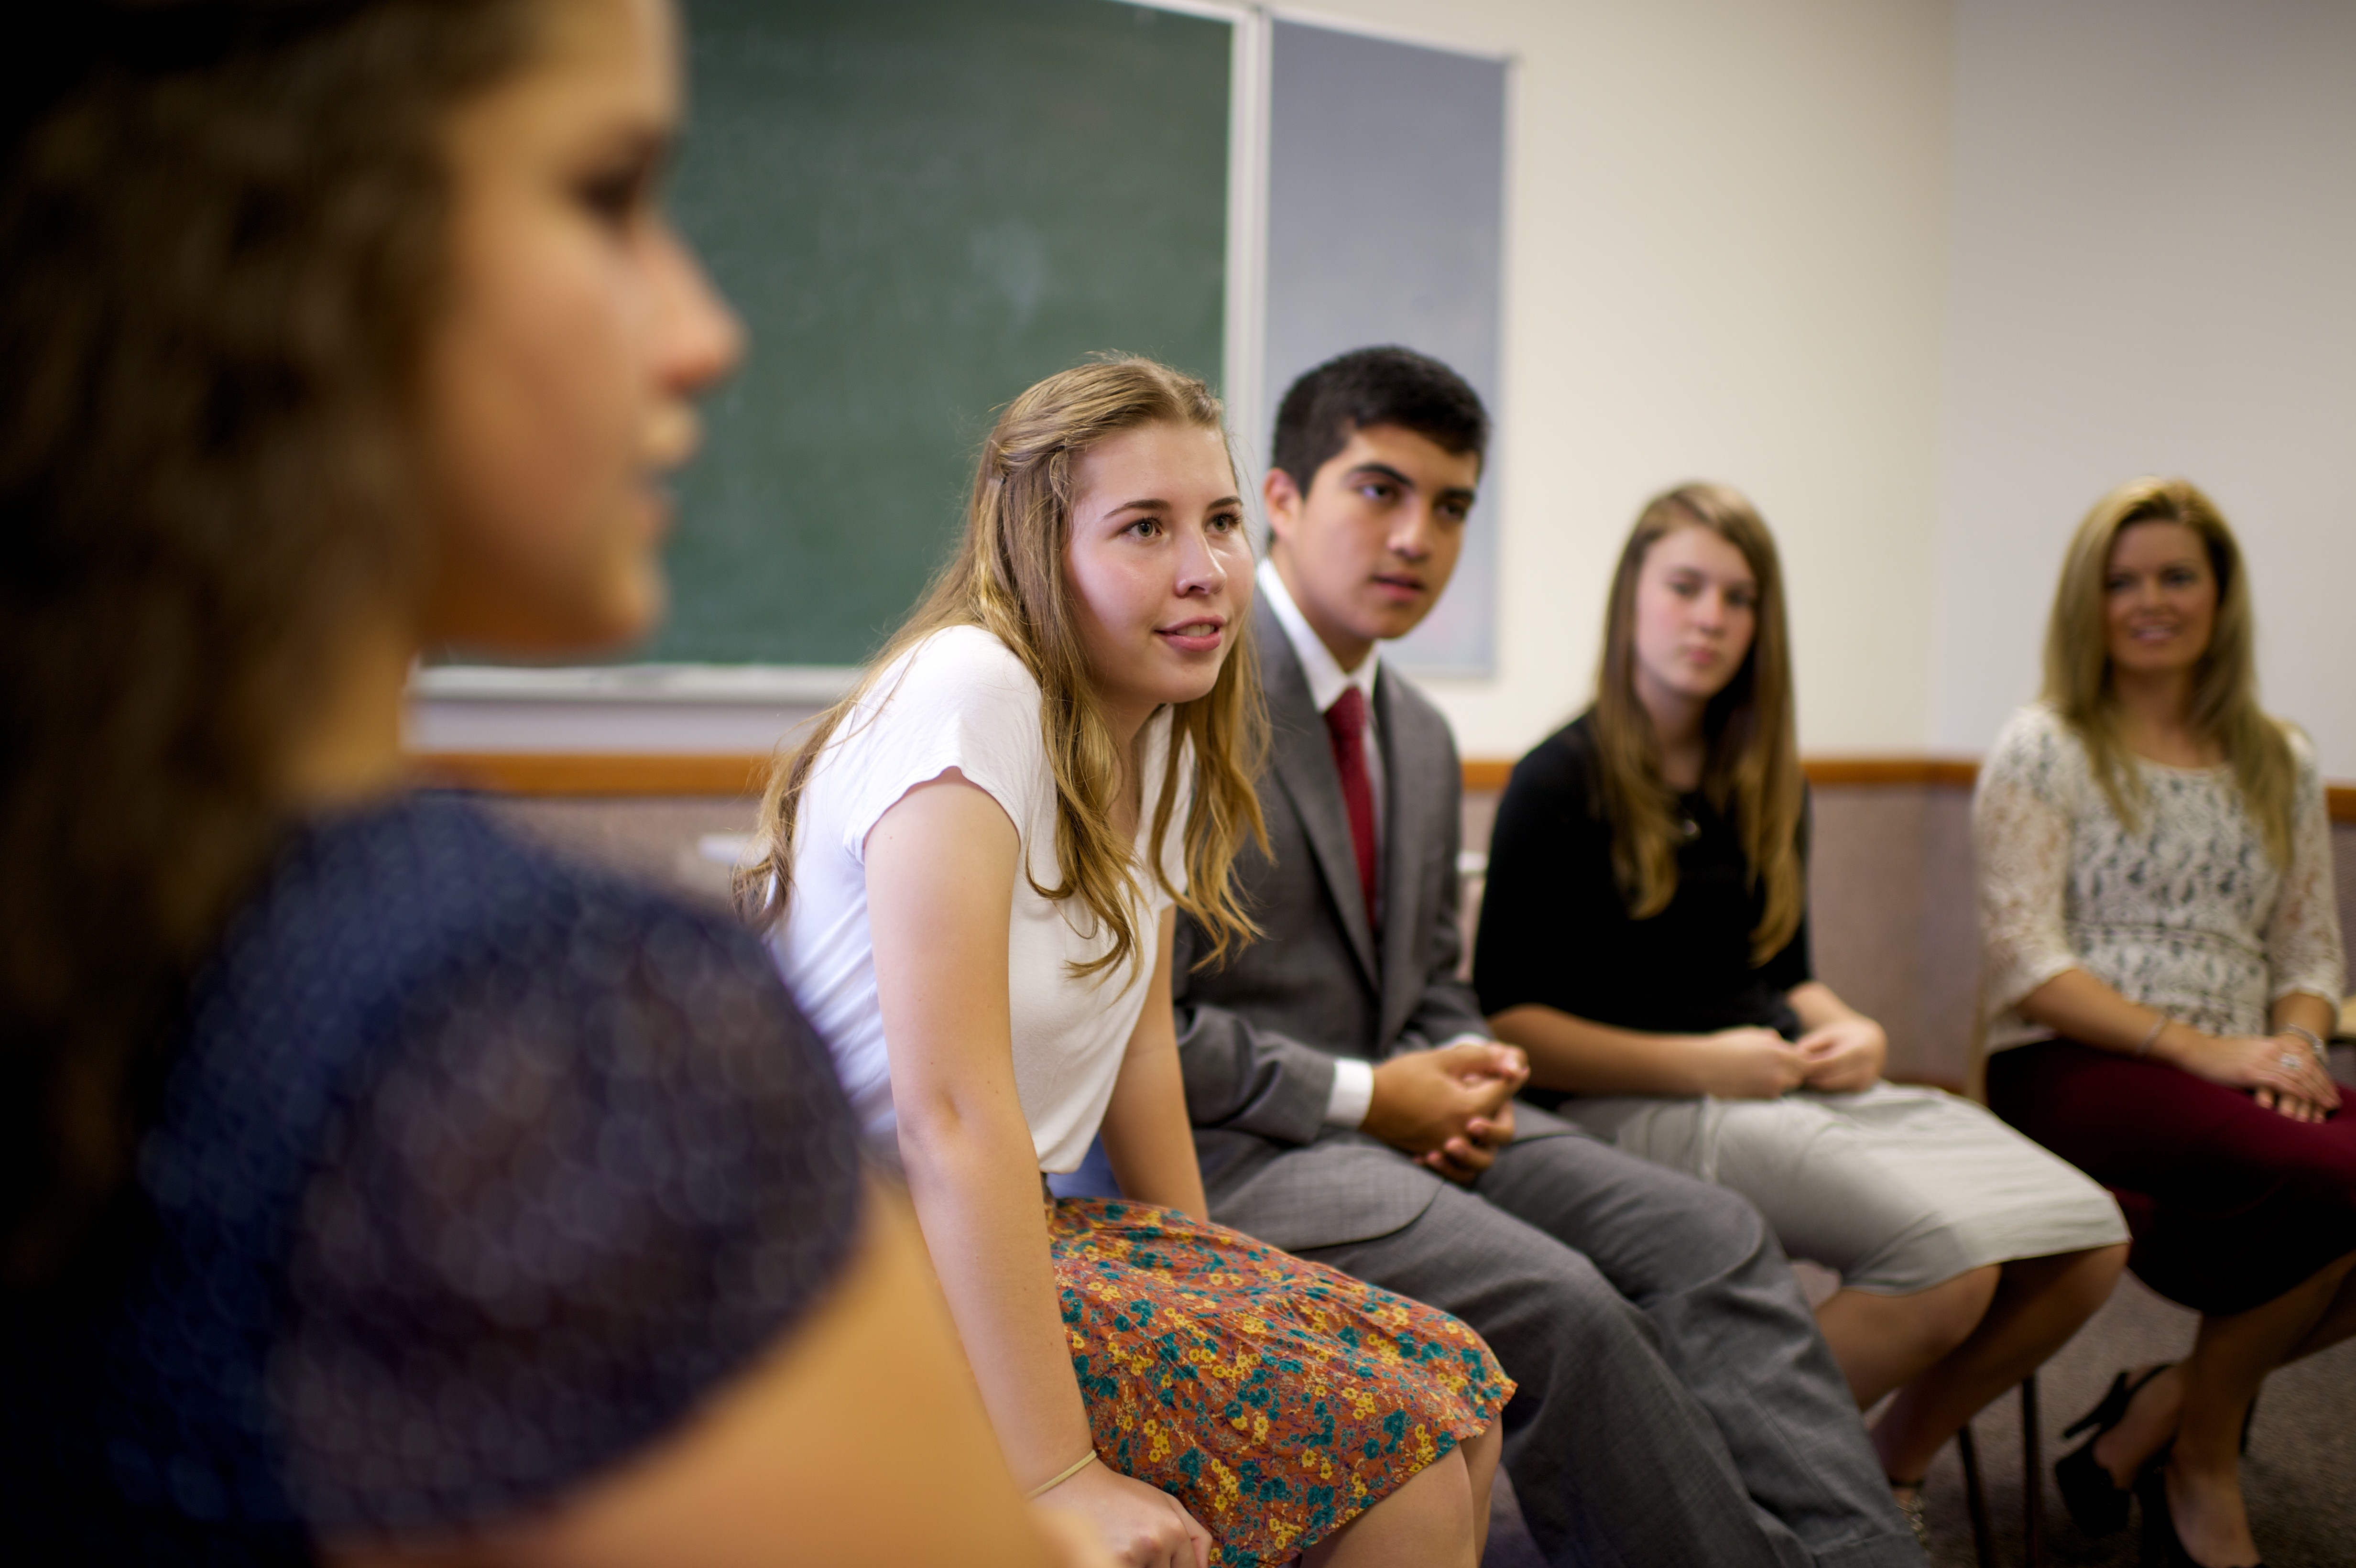 A young woman with long blond hair, wearing a skirt, leans forward in her chair and looks to the front of the classroom with other young men and women.